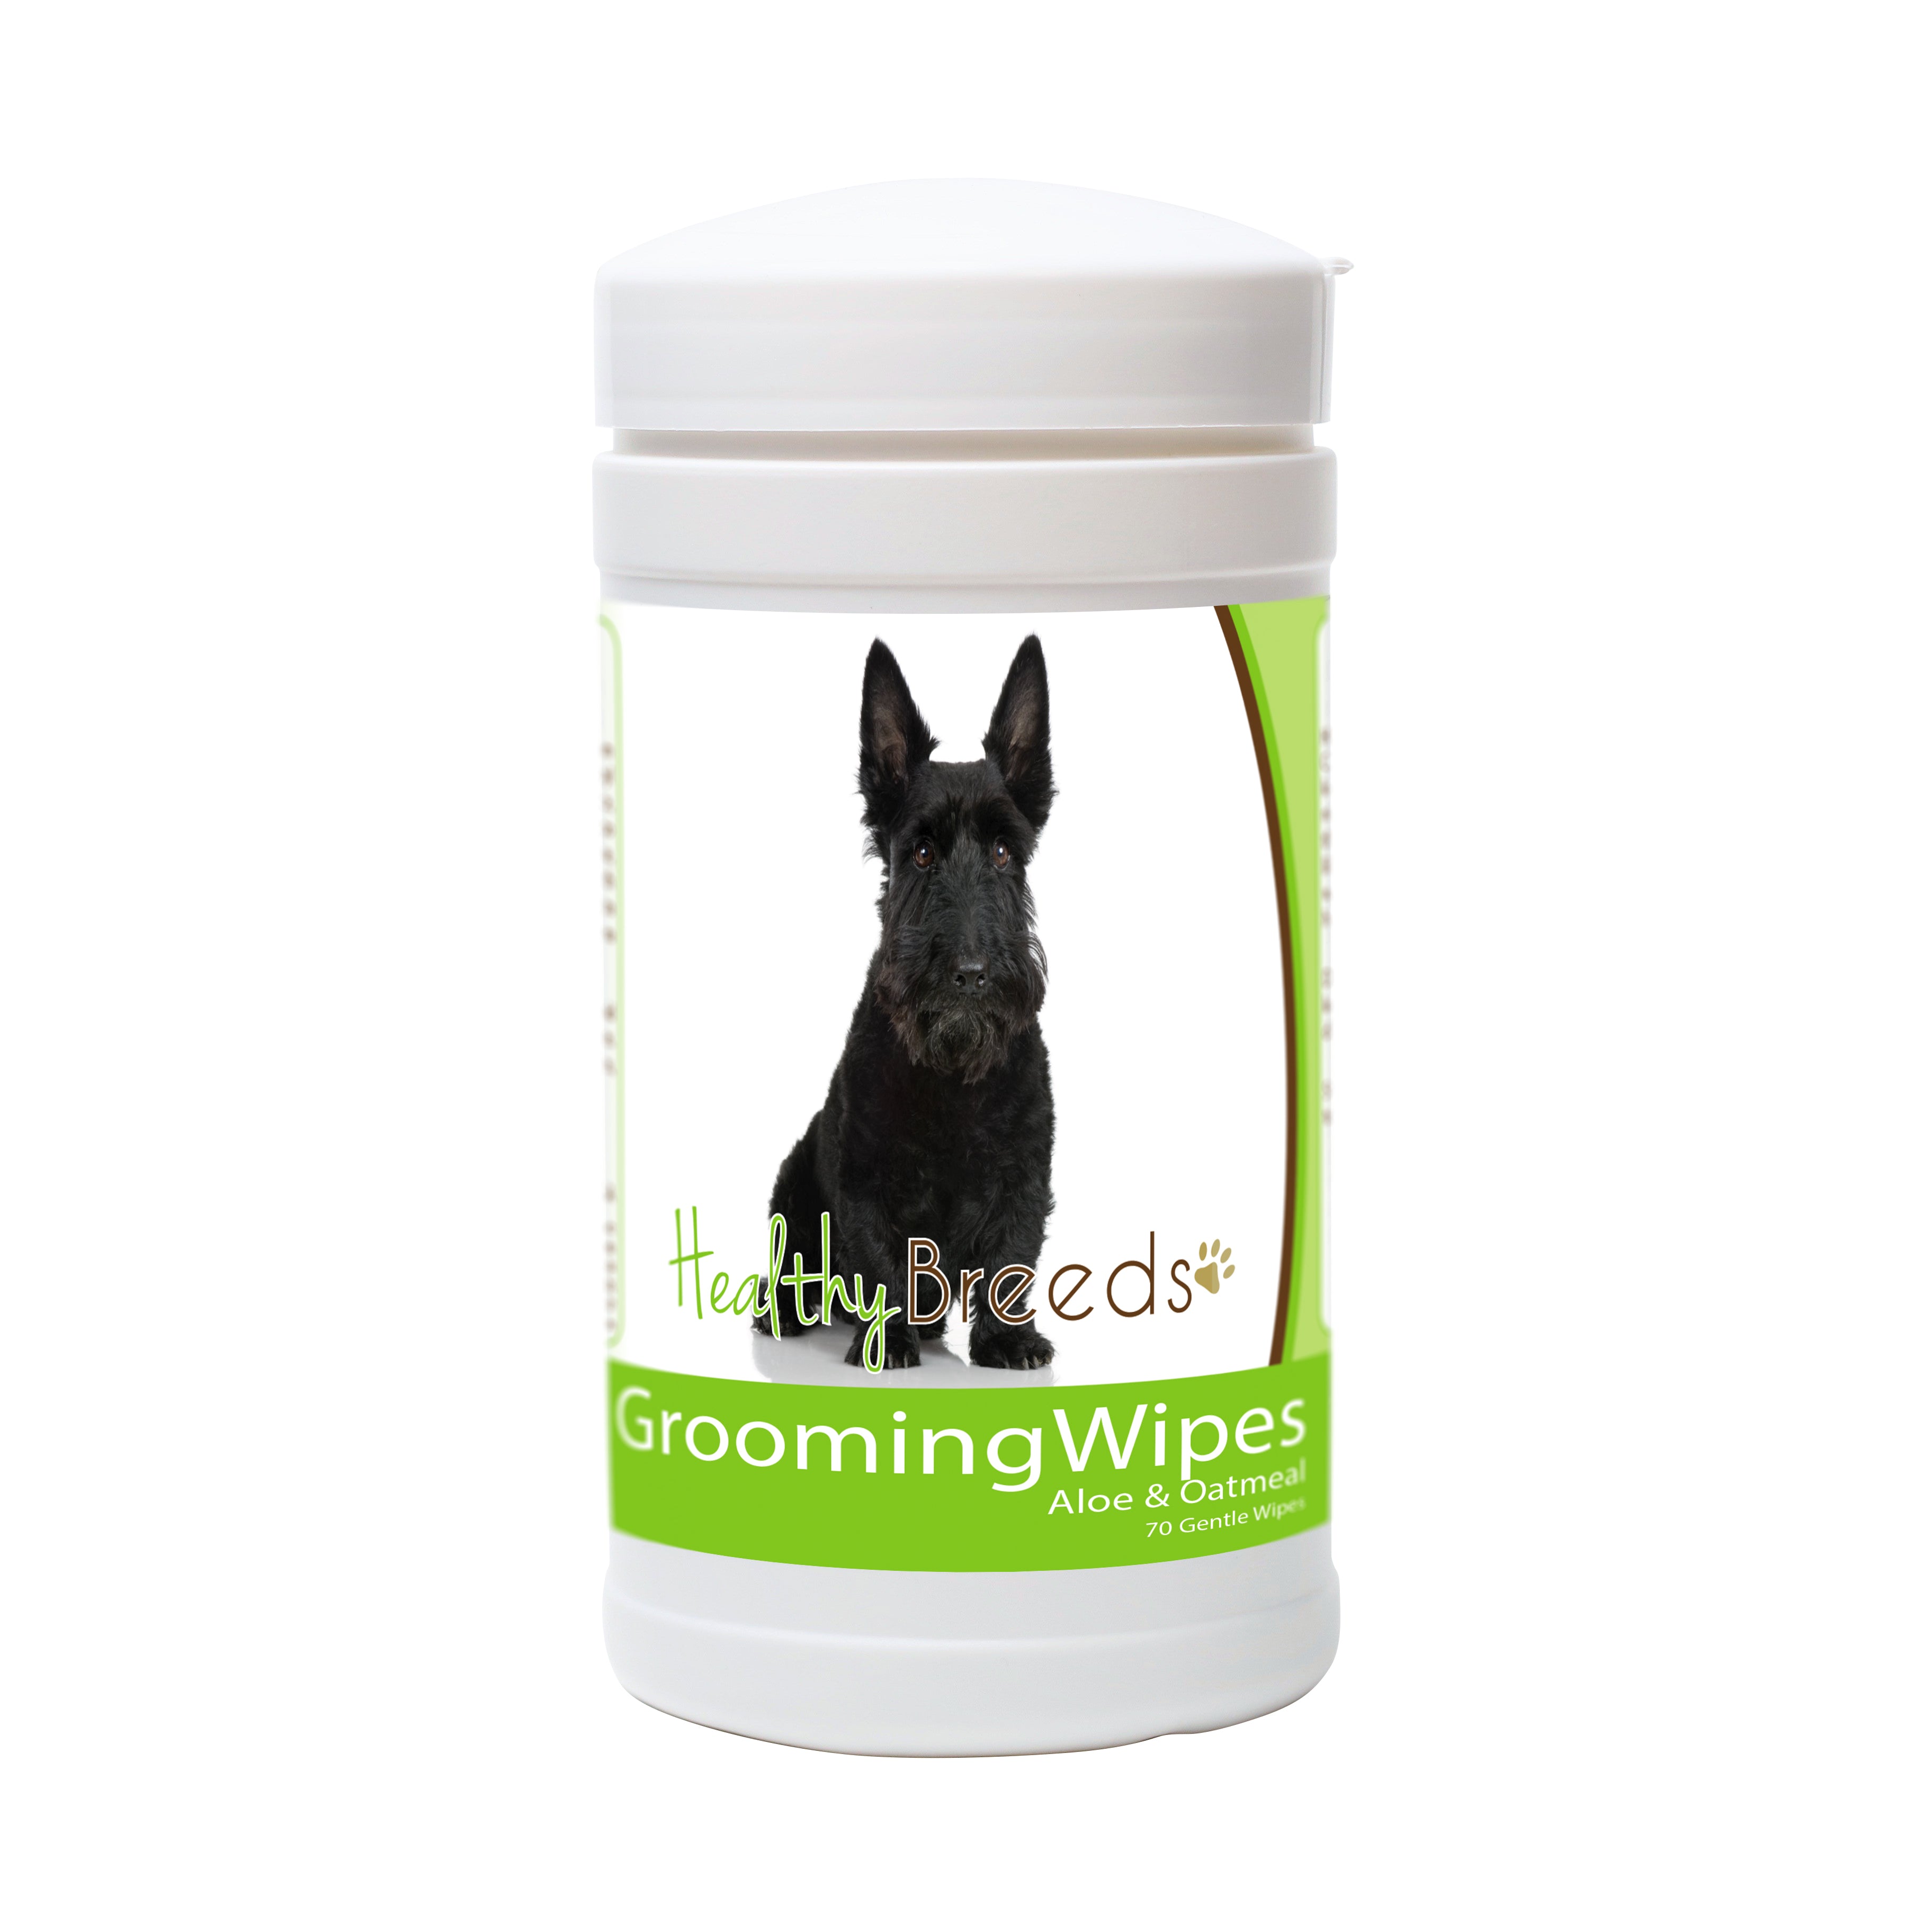 Scottish Terrier Grooming Wipes 70 Count